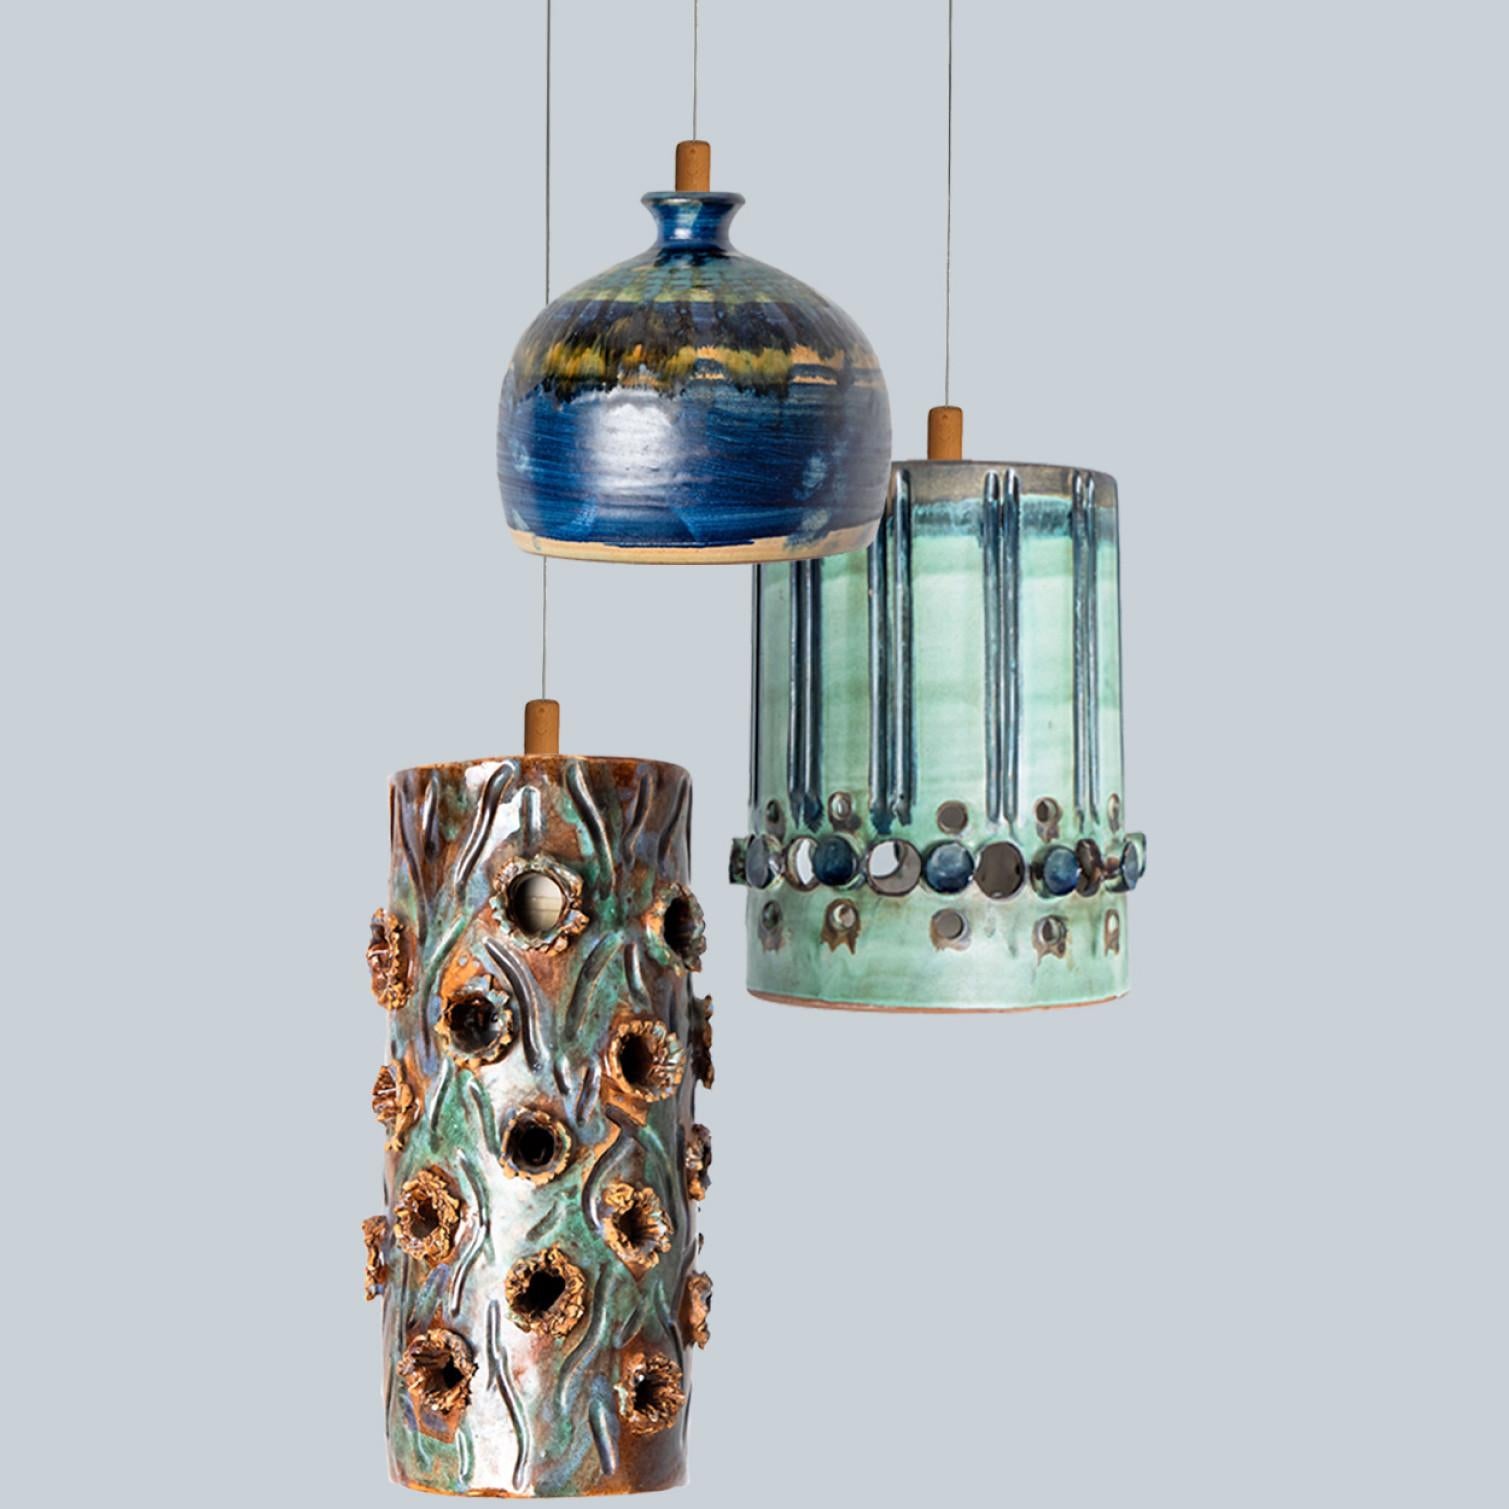 Playful arrangement of stunning round hanging lamps with an unusual shape, made with rich turquoise colored brown and blue ceramics, manufactured in the 1970s in Denmark. We have a multitude of unique colored ceramic light sets and arrangements, all